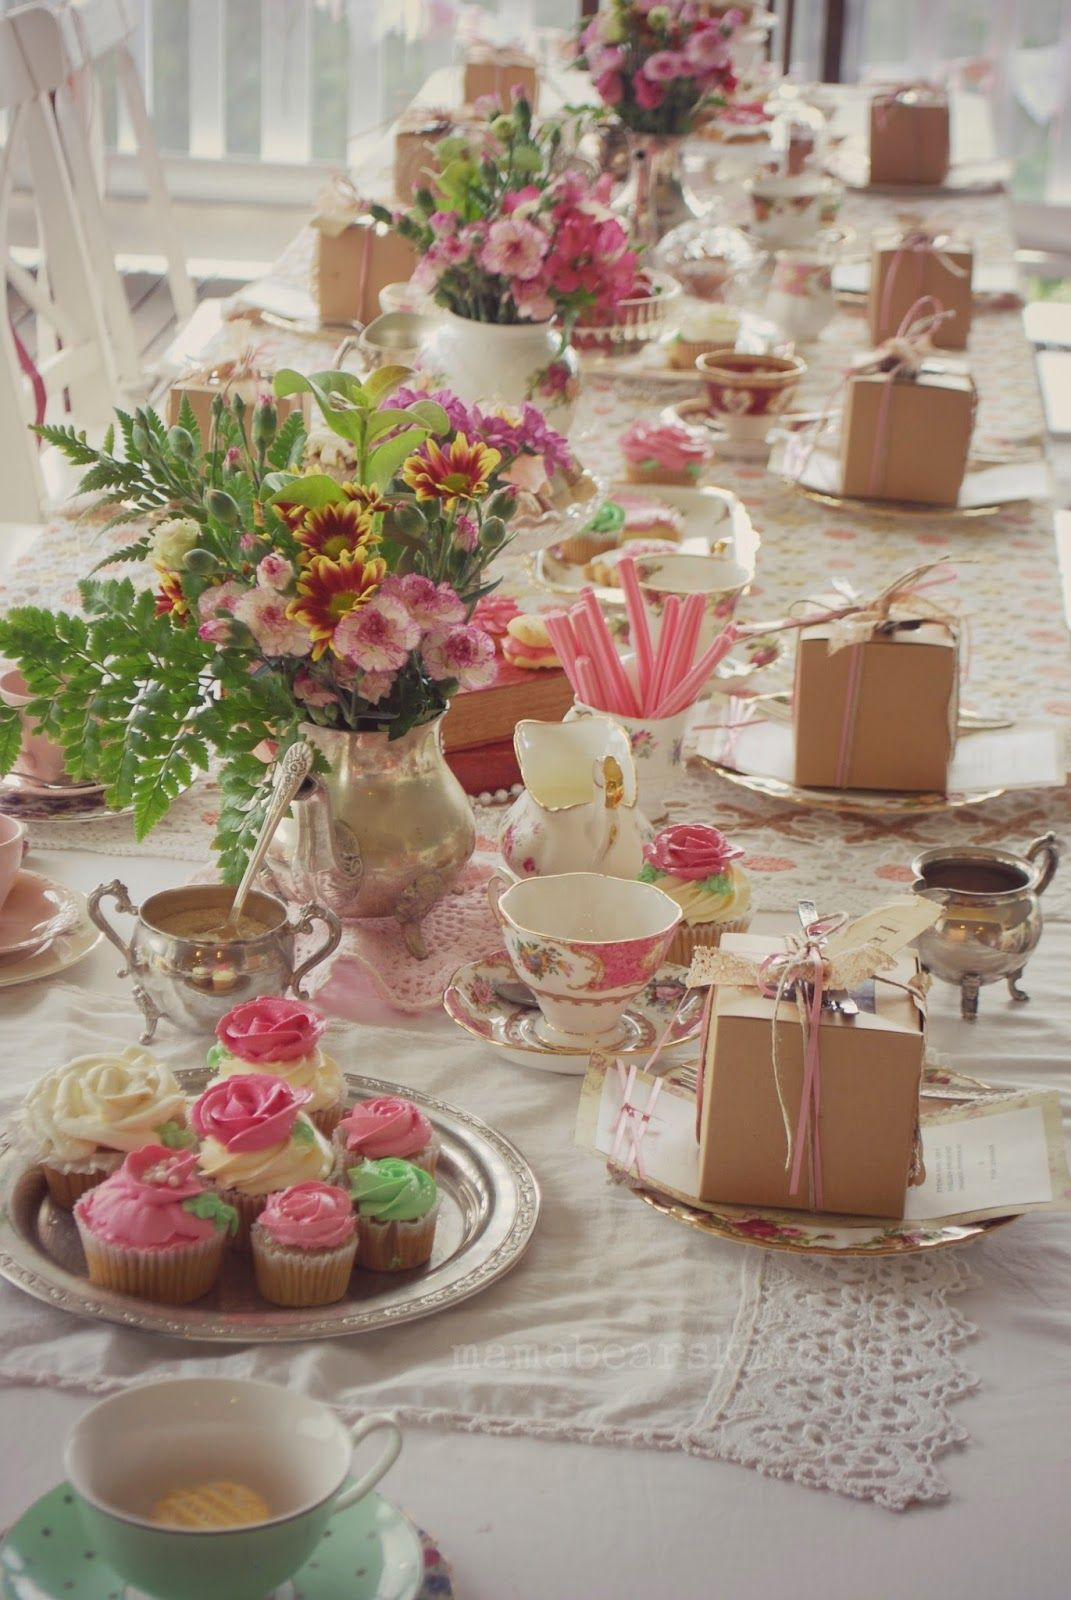 Kitchen Tea Party Food Ideas
 High Tea Luncheon the site this is on is wonderful